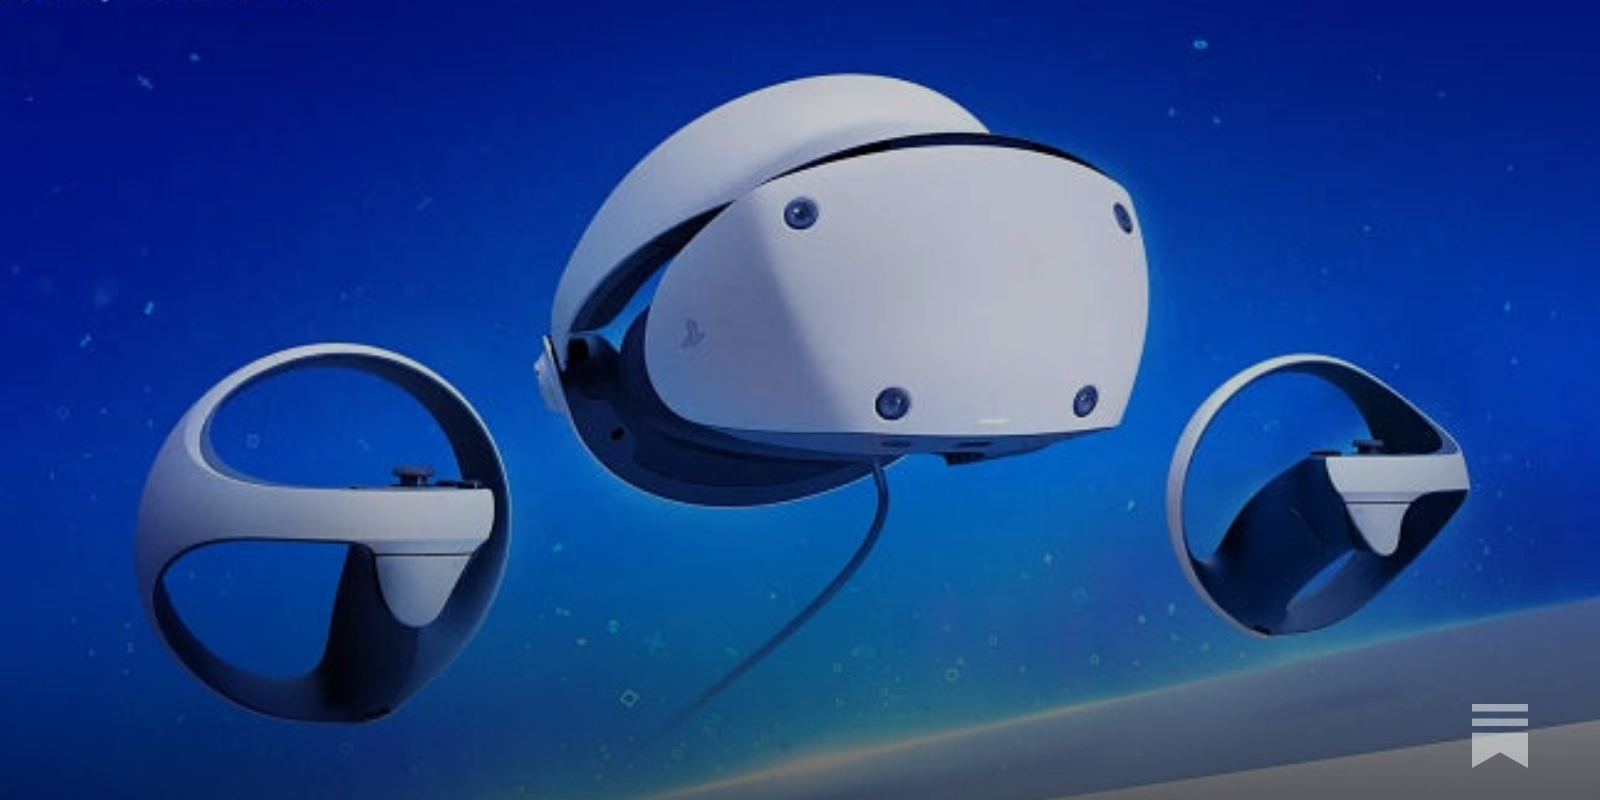 PlayStation VR2: $549 price, releases in February, pre-orders going live  soon